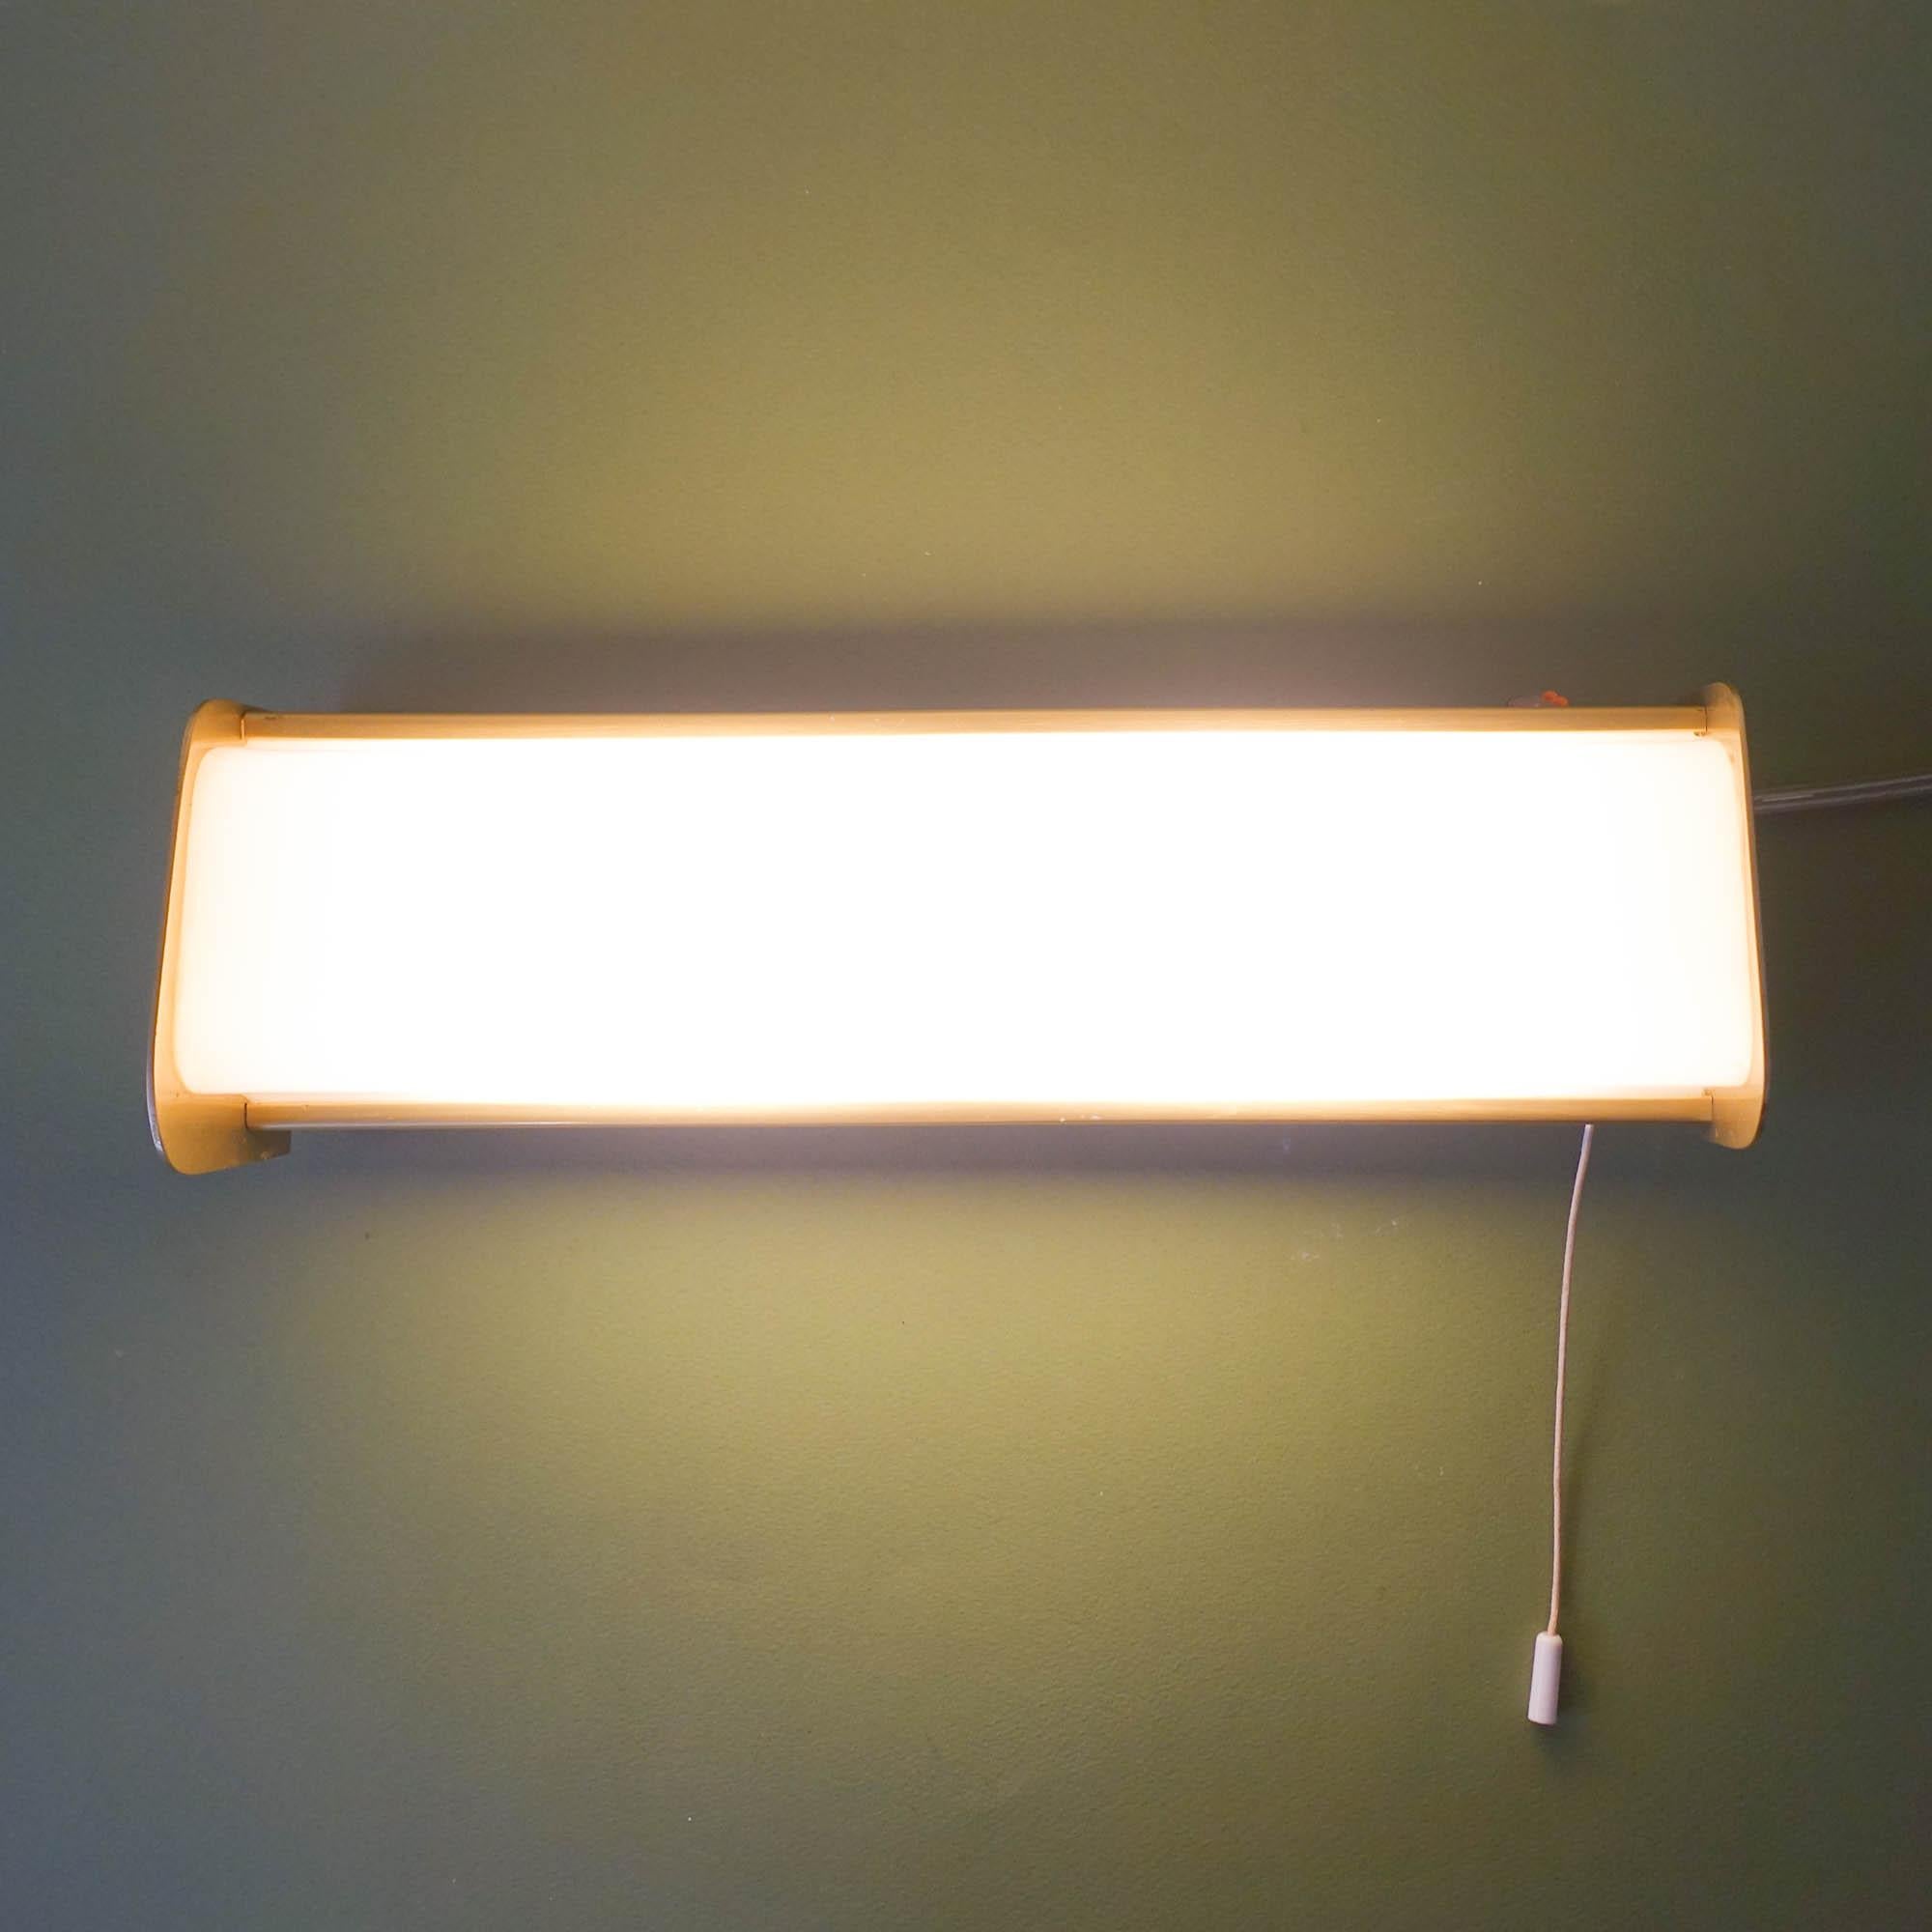 This wall sconce was designed and produced in Italy during the 1950's. The structure is in brass and the shade in white plastic. The laterals have small holes that can spread the light. It fits two E14 bulbs. In original and good vintage condition.